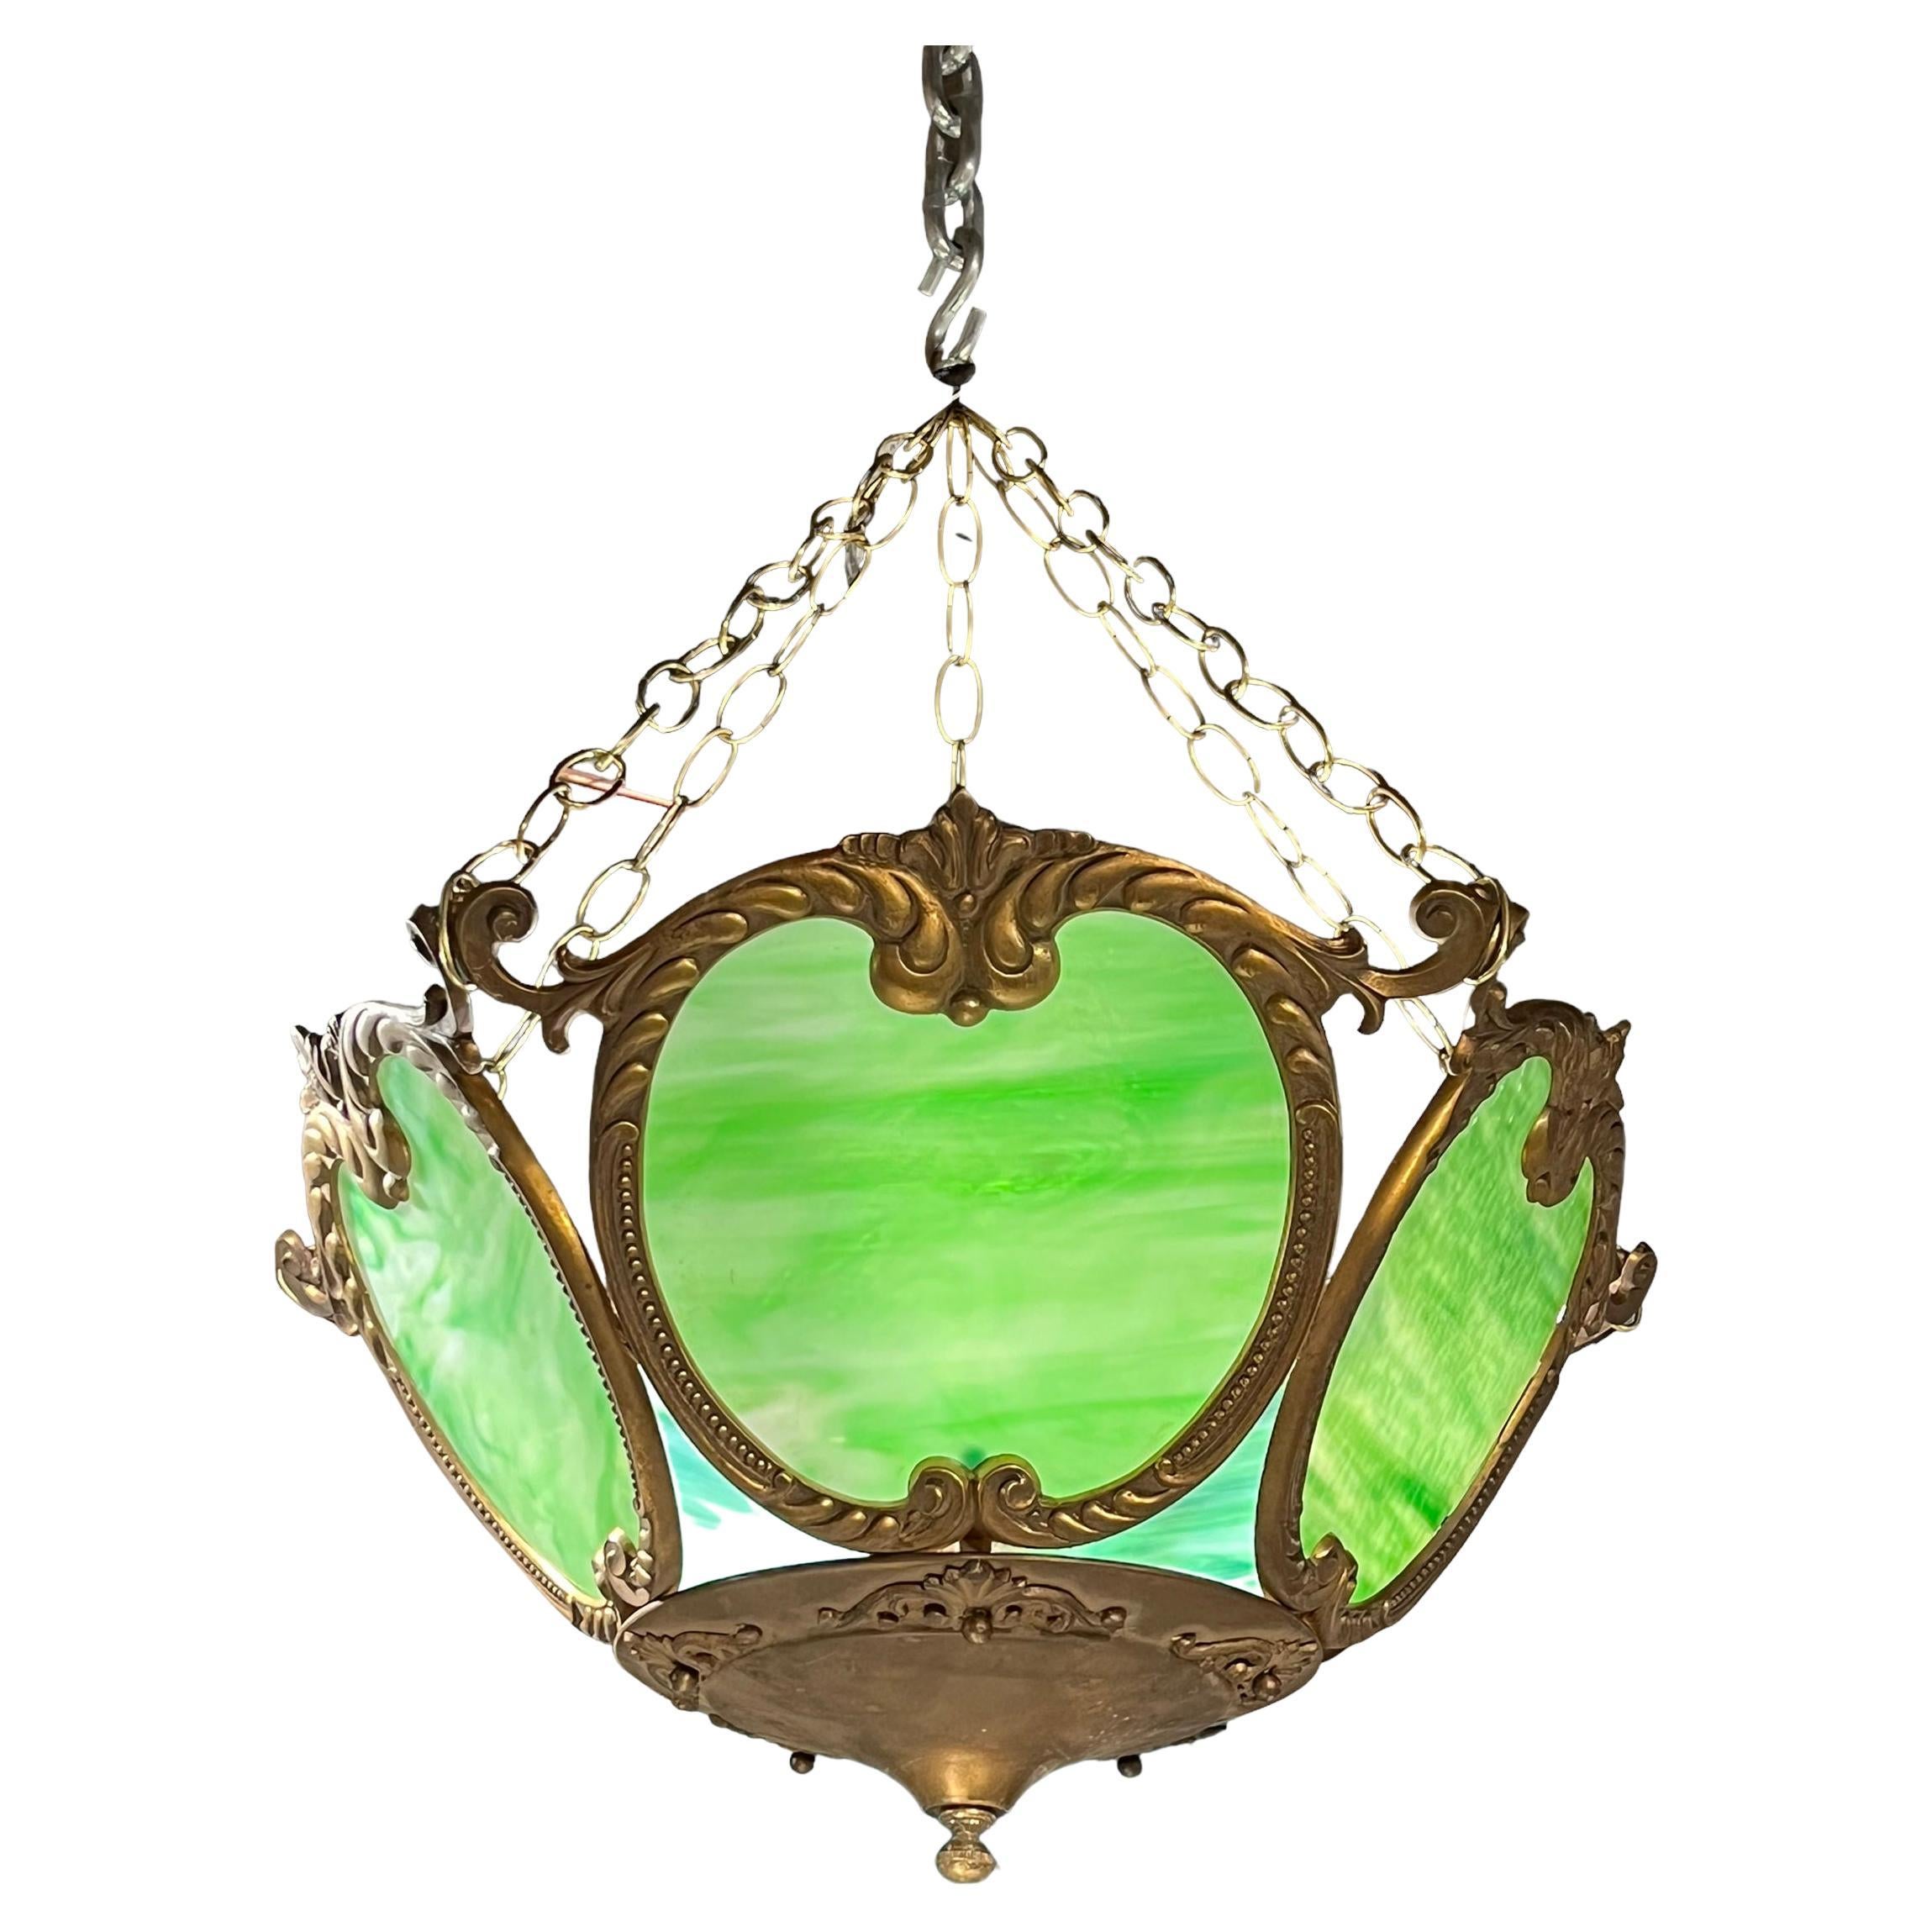 Vintage Green Slag Glass and Bronze Chandelier in Arts and Crafts Style For Sale